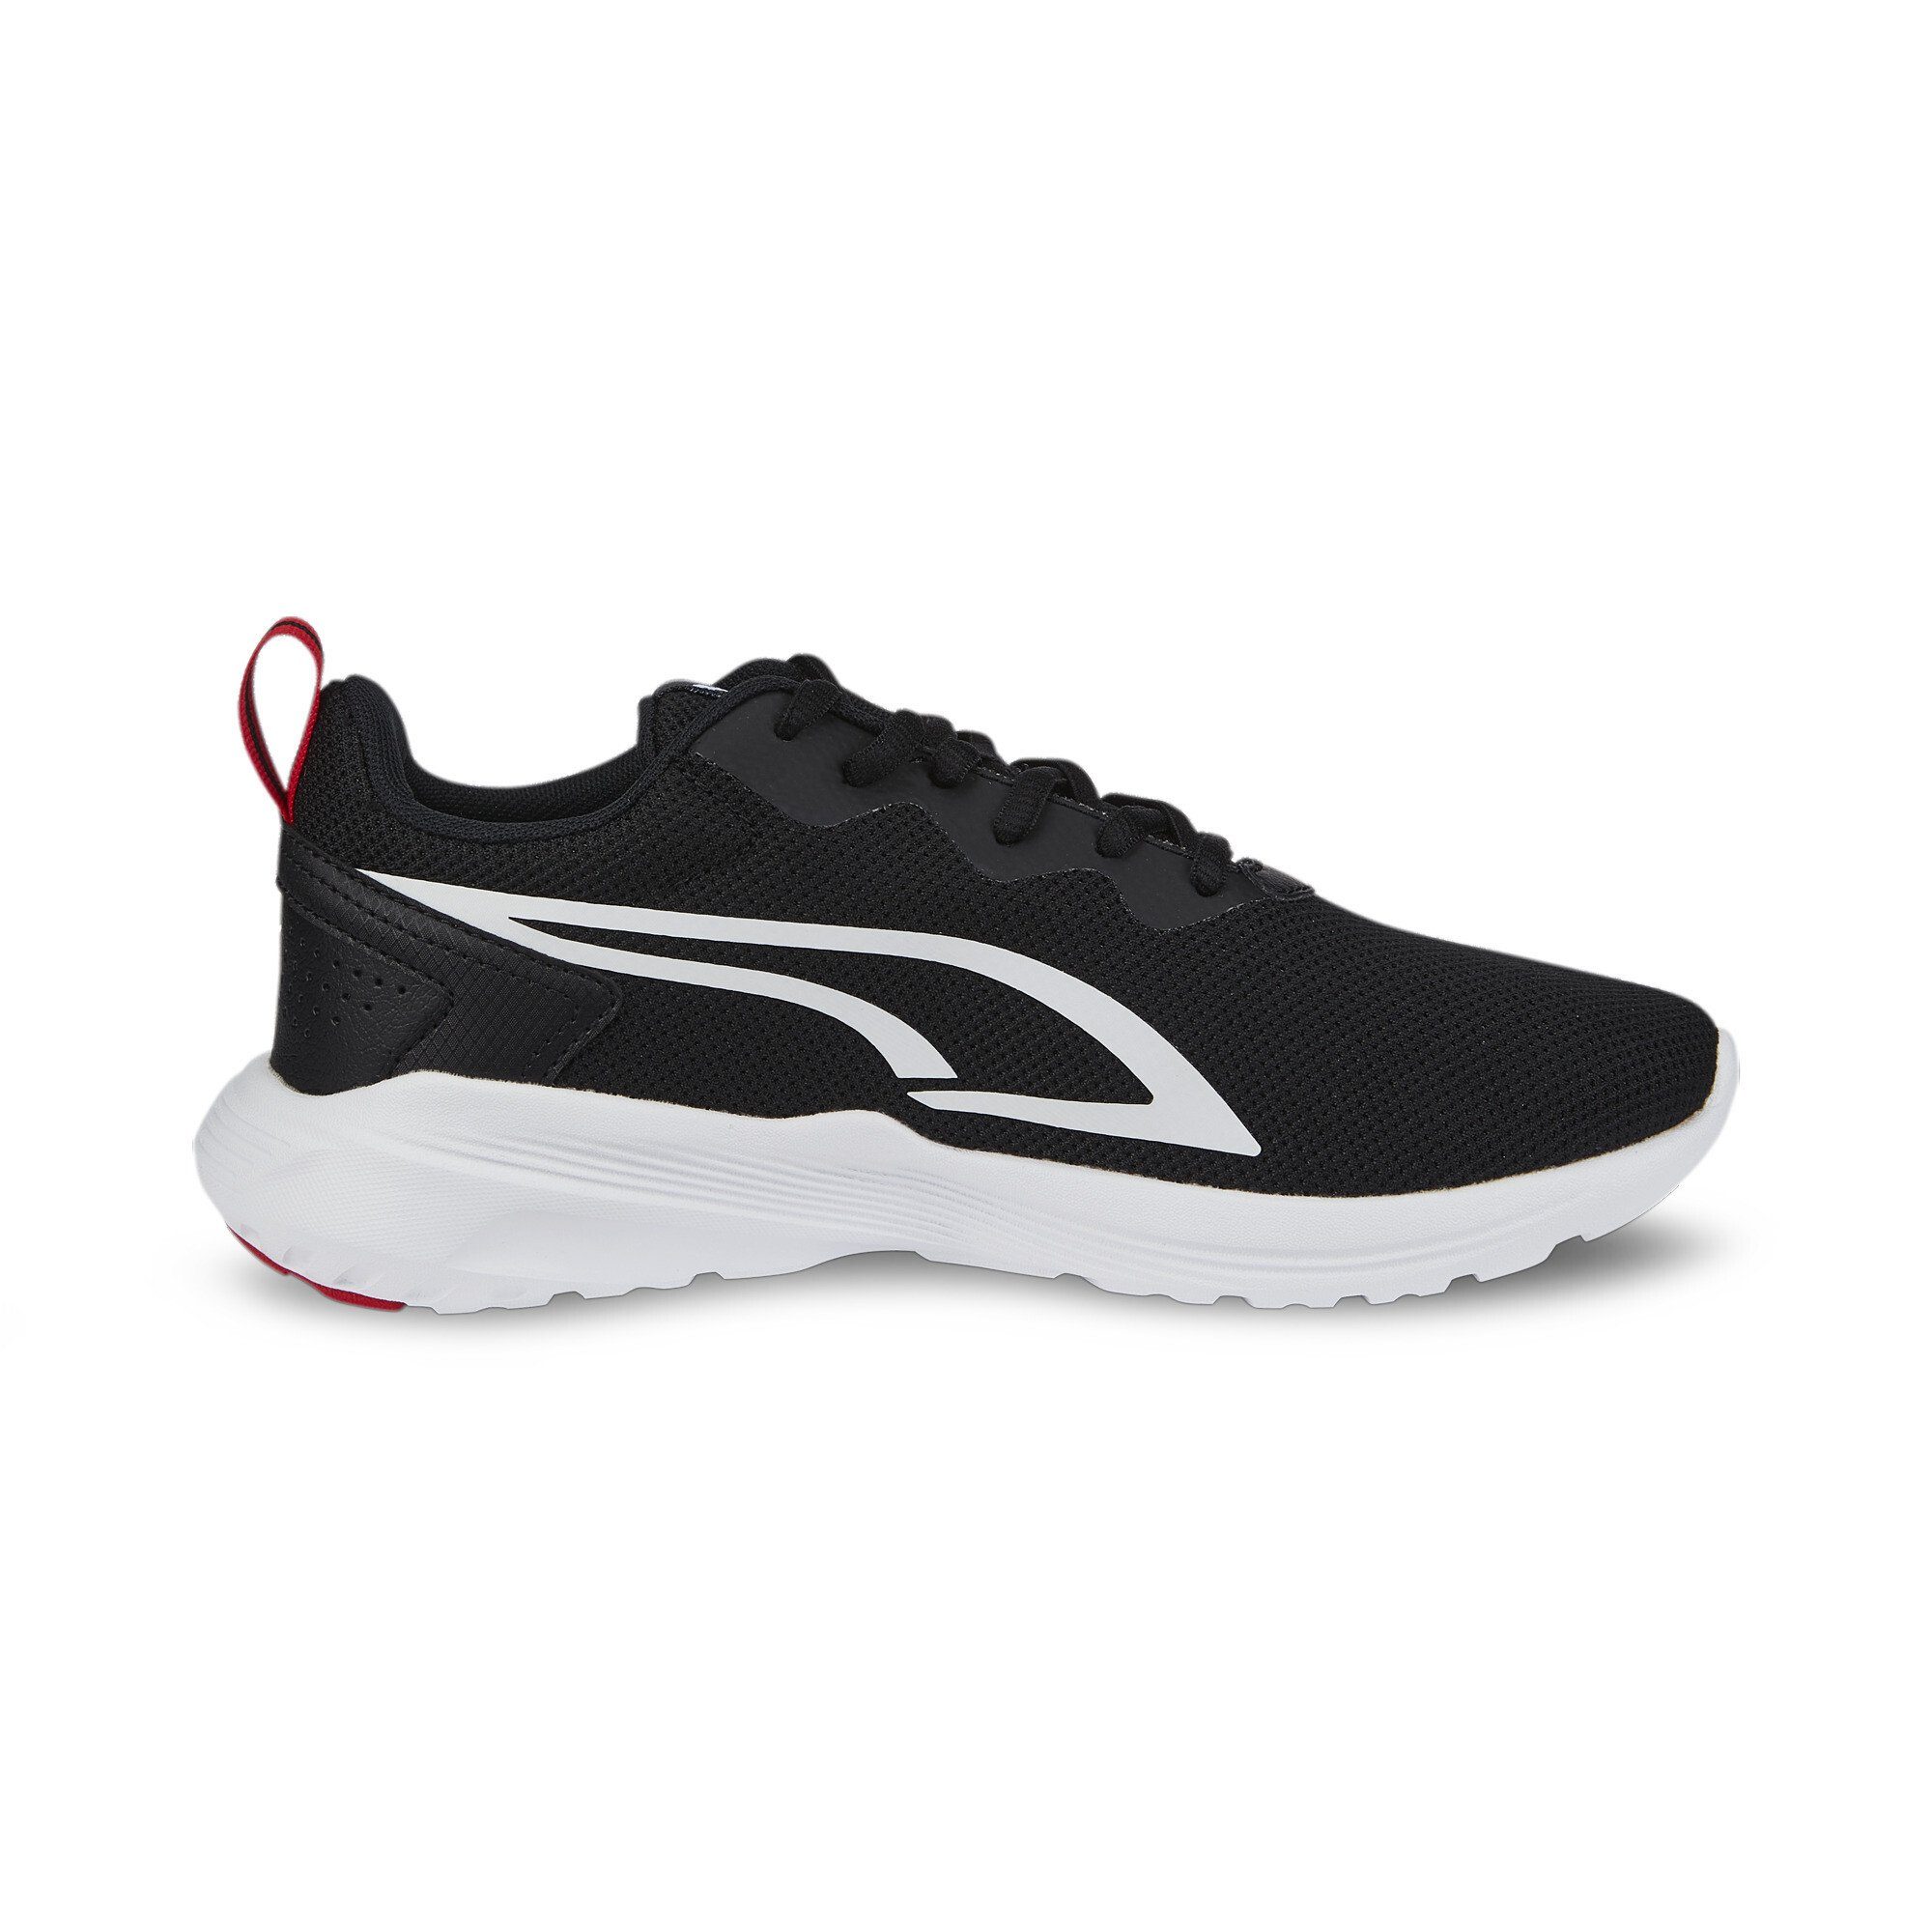 PUMA All Day Active Sneakers Sneaker Black White Jugendliche